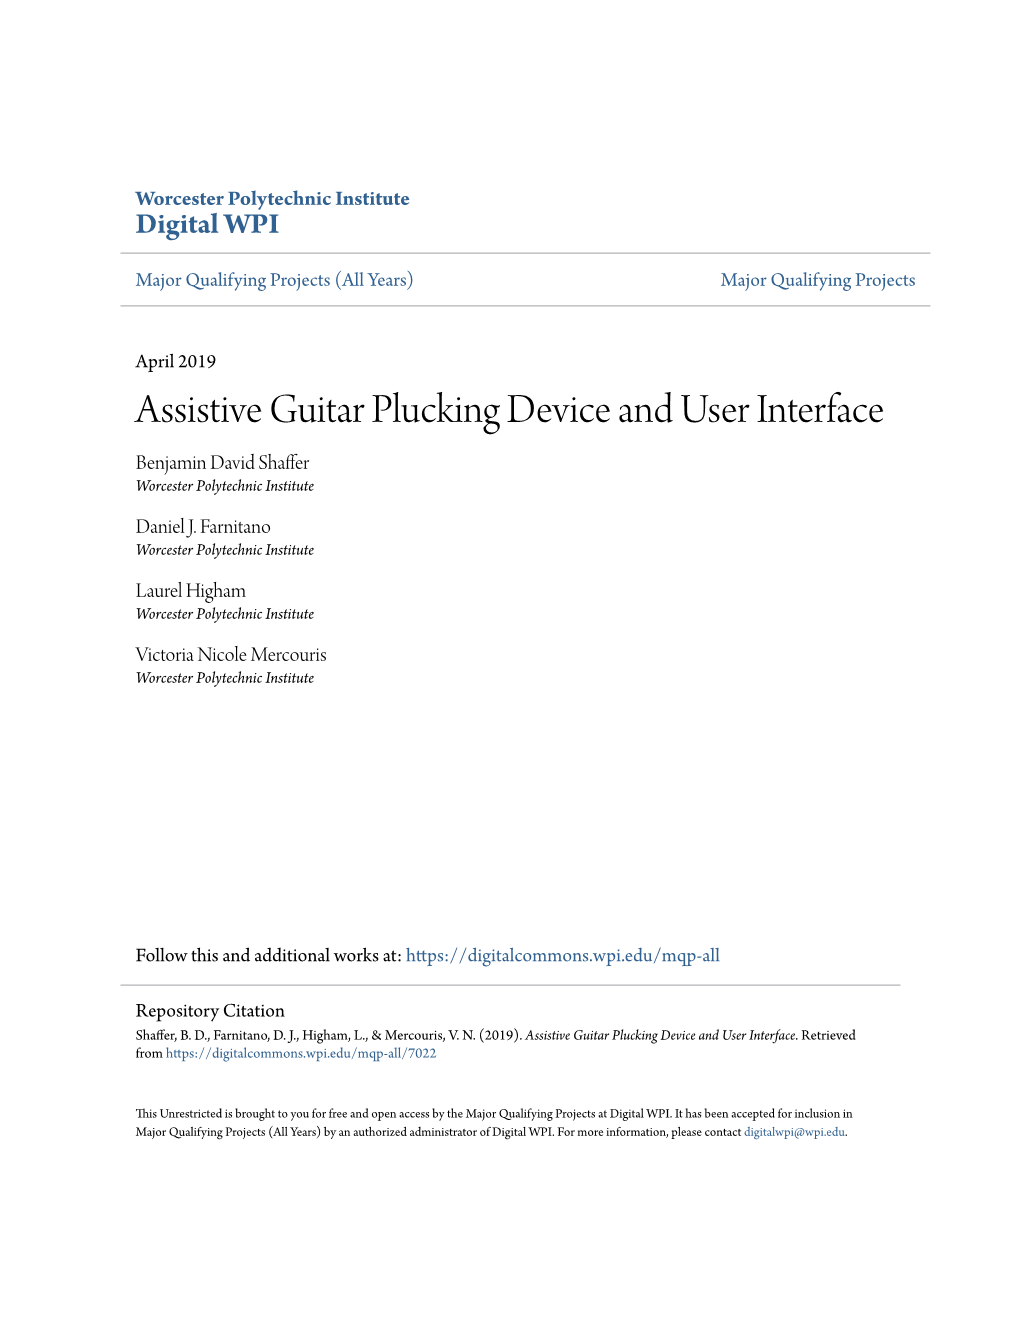 Assistive Guitar Plucking Device and User Interface Benjamin David Shaffer Worcester Polytechnic Institute